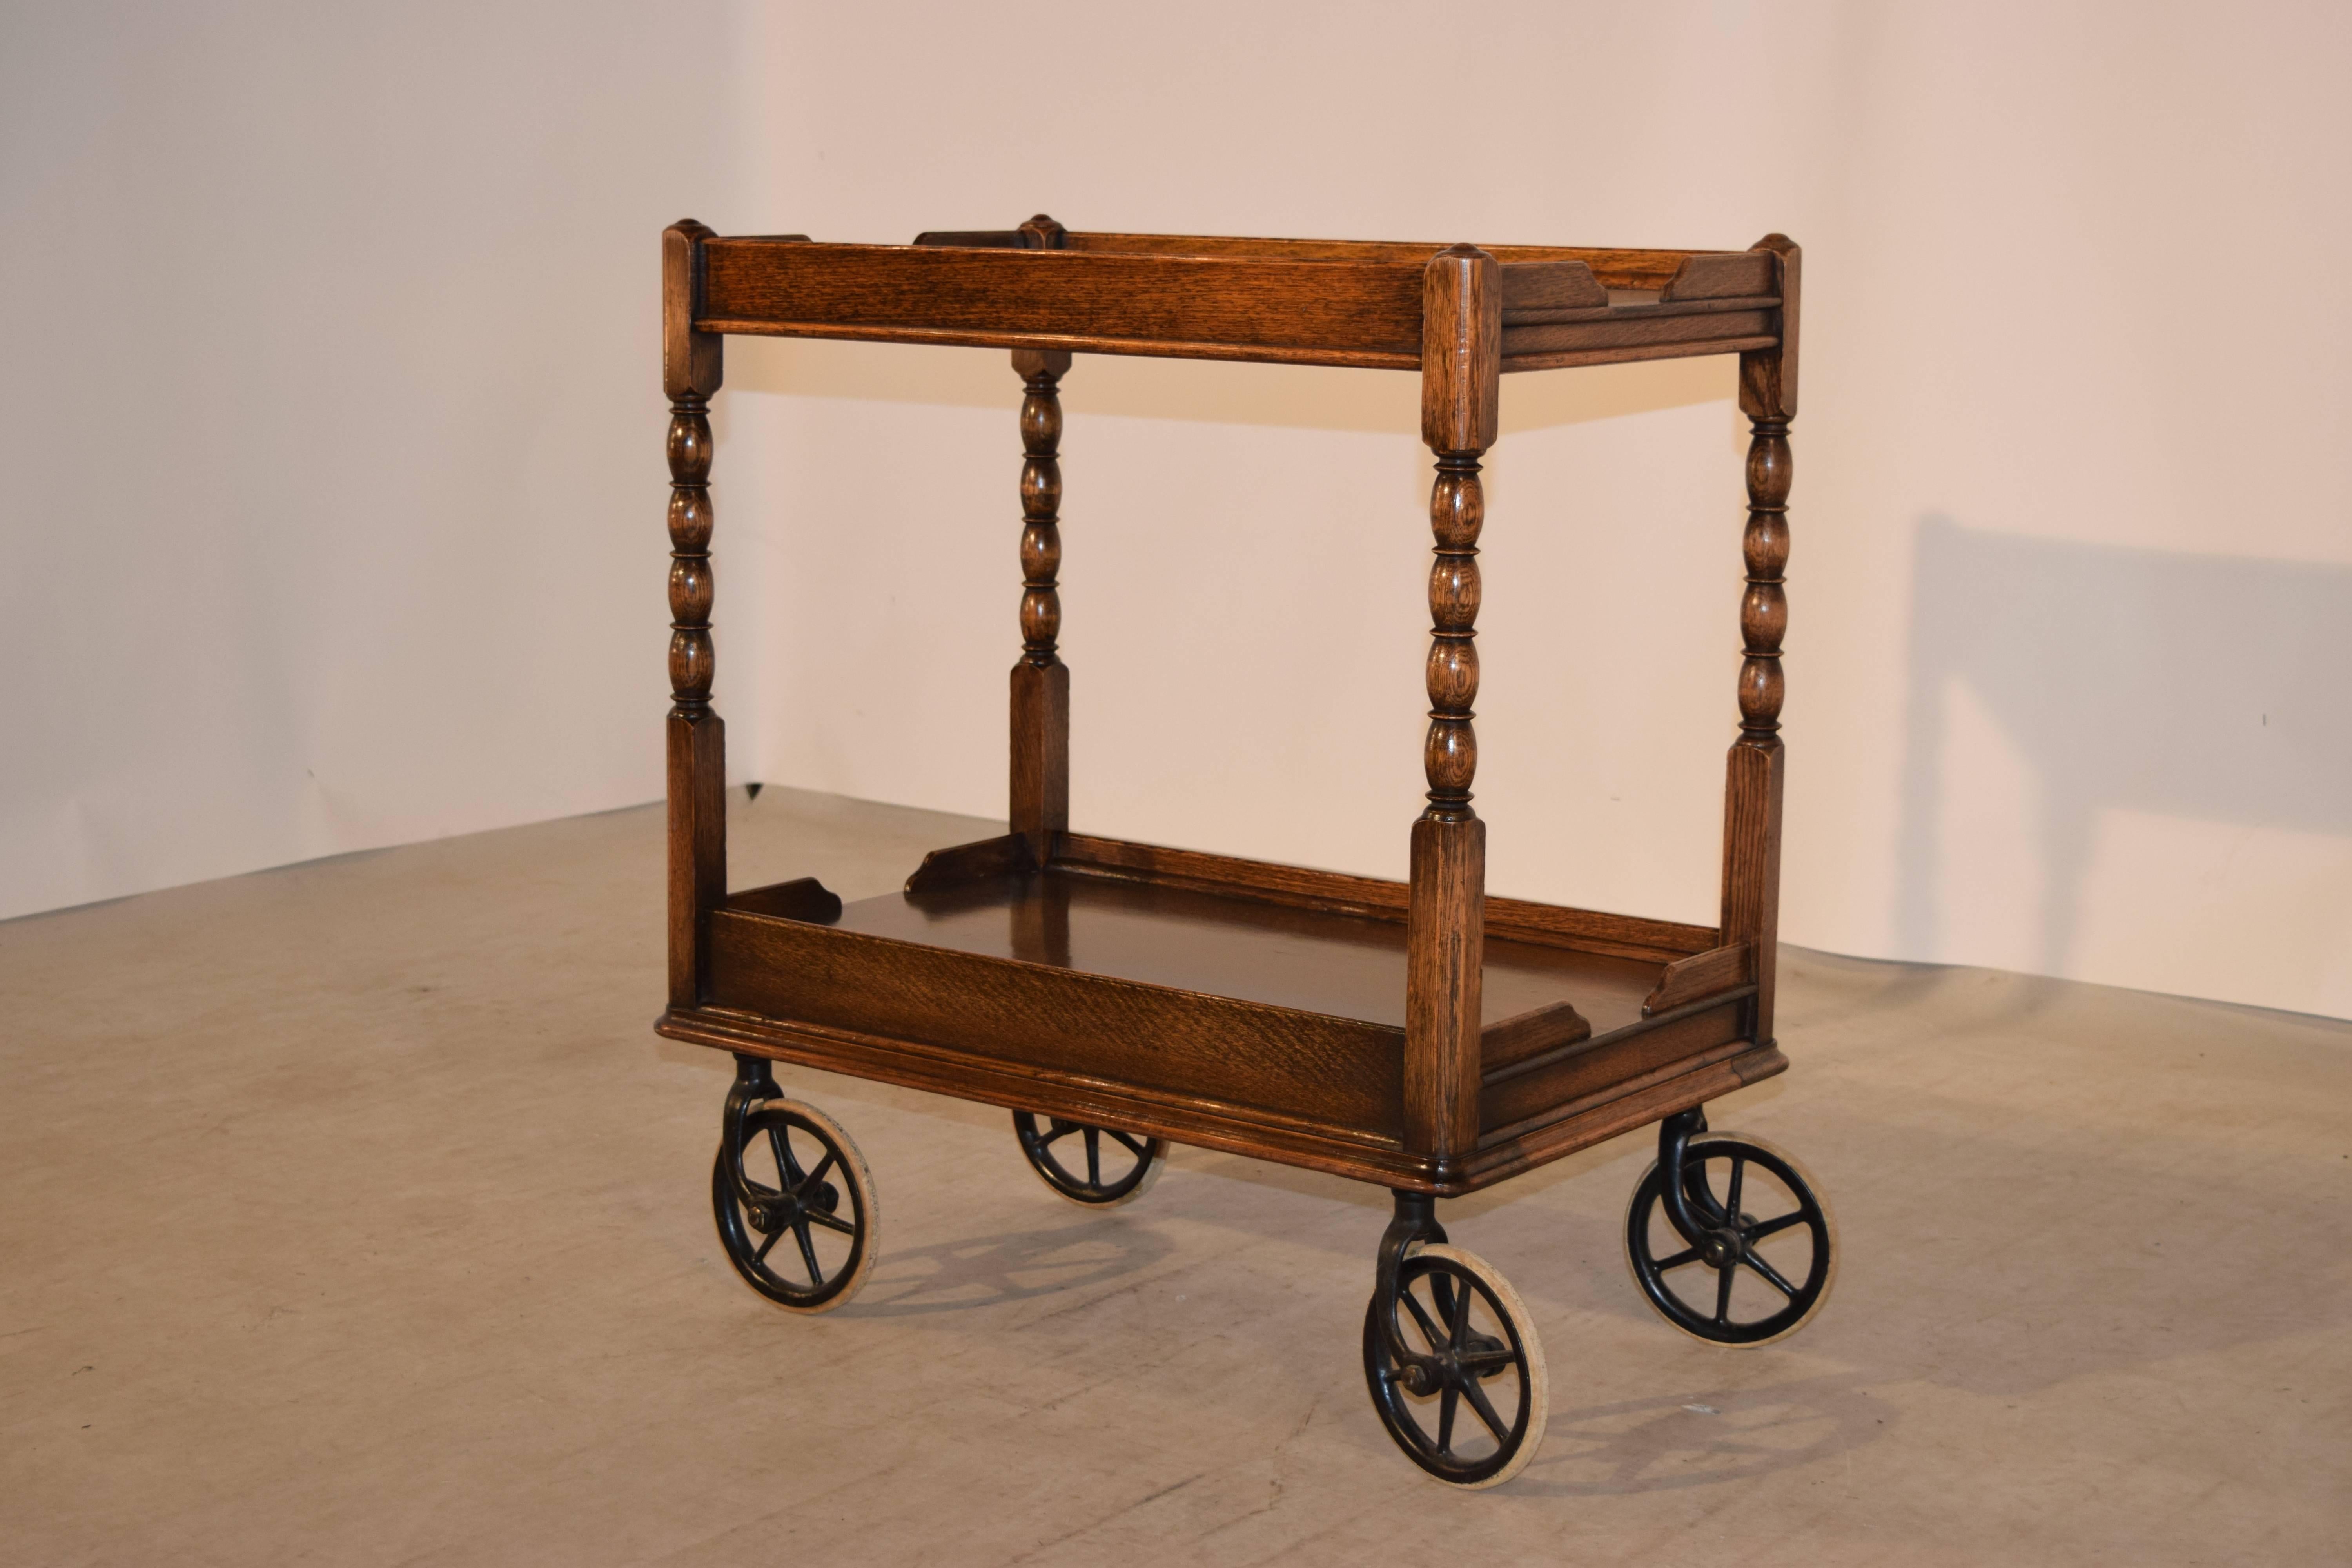 19th century English oak drinks cart with a molded gallery around the top and lower shelf, separated by hand turned bob and stop shelf supports. It is raised on the original wheels, which are unusually large, which gives it a whimsical look.